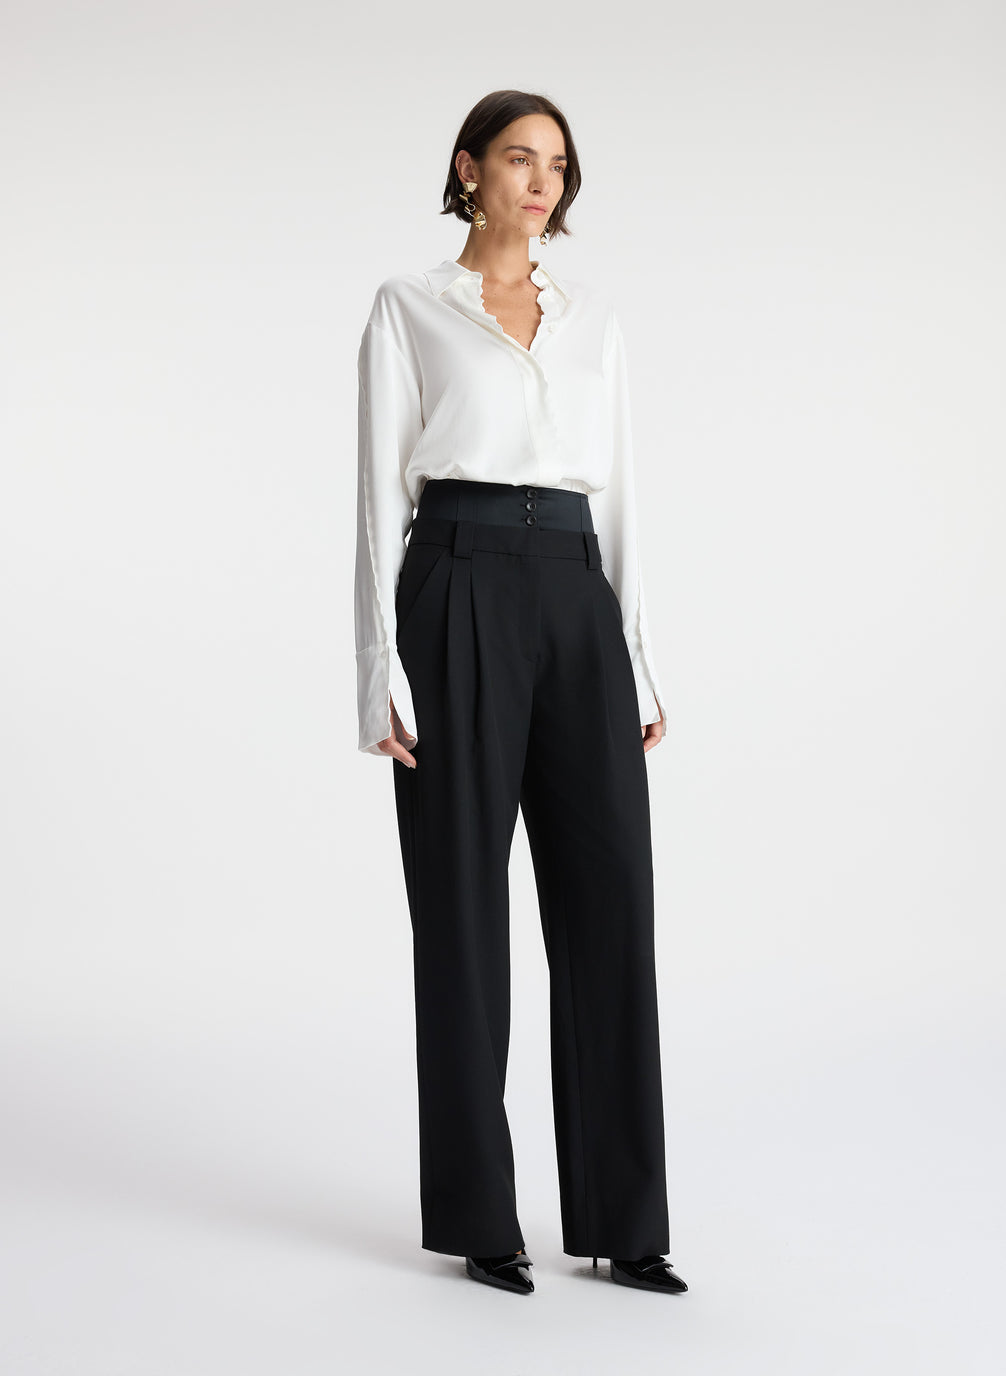 side view of woman wearing white scalloped detailed long sleeve top and black pants